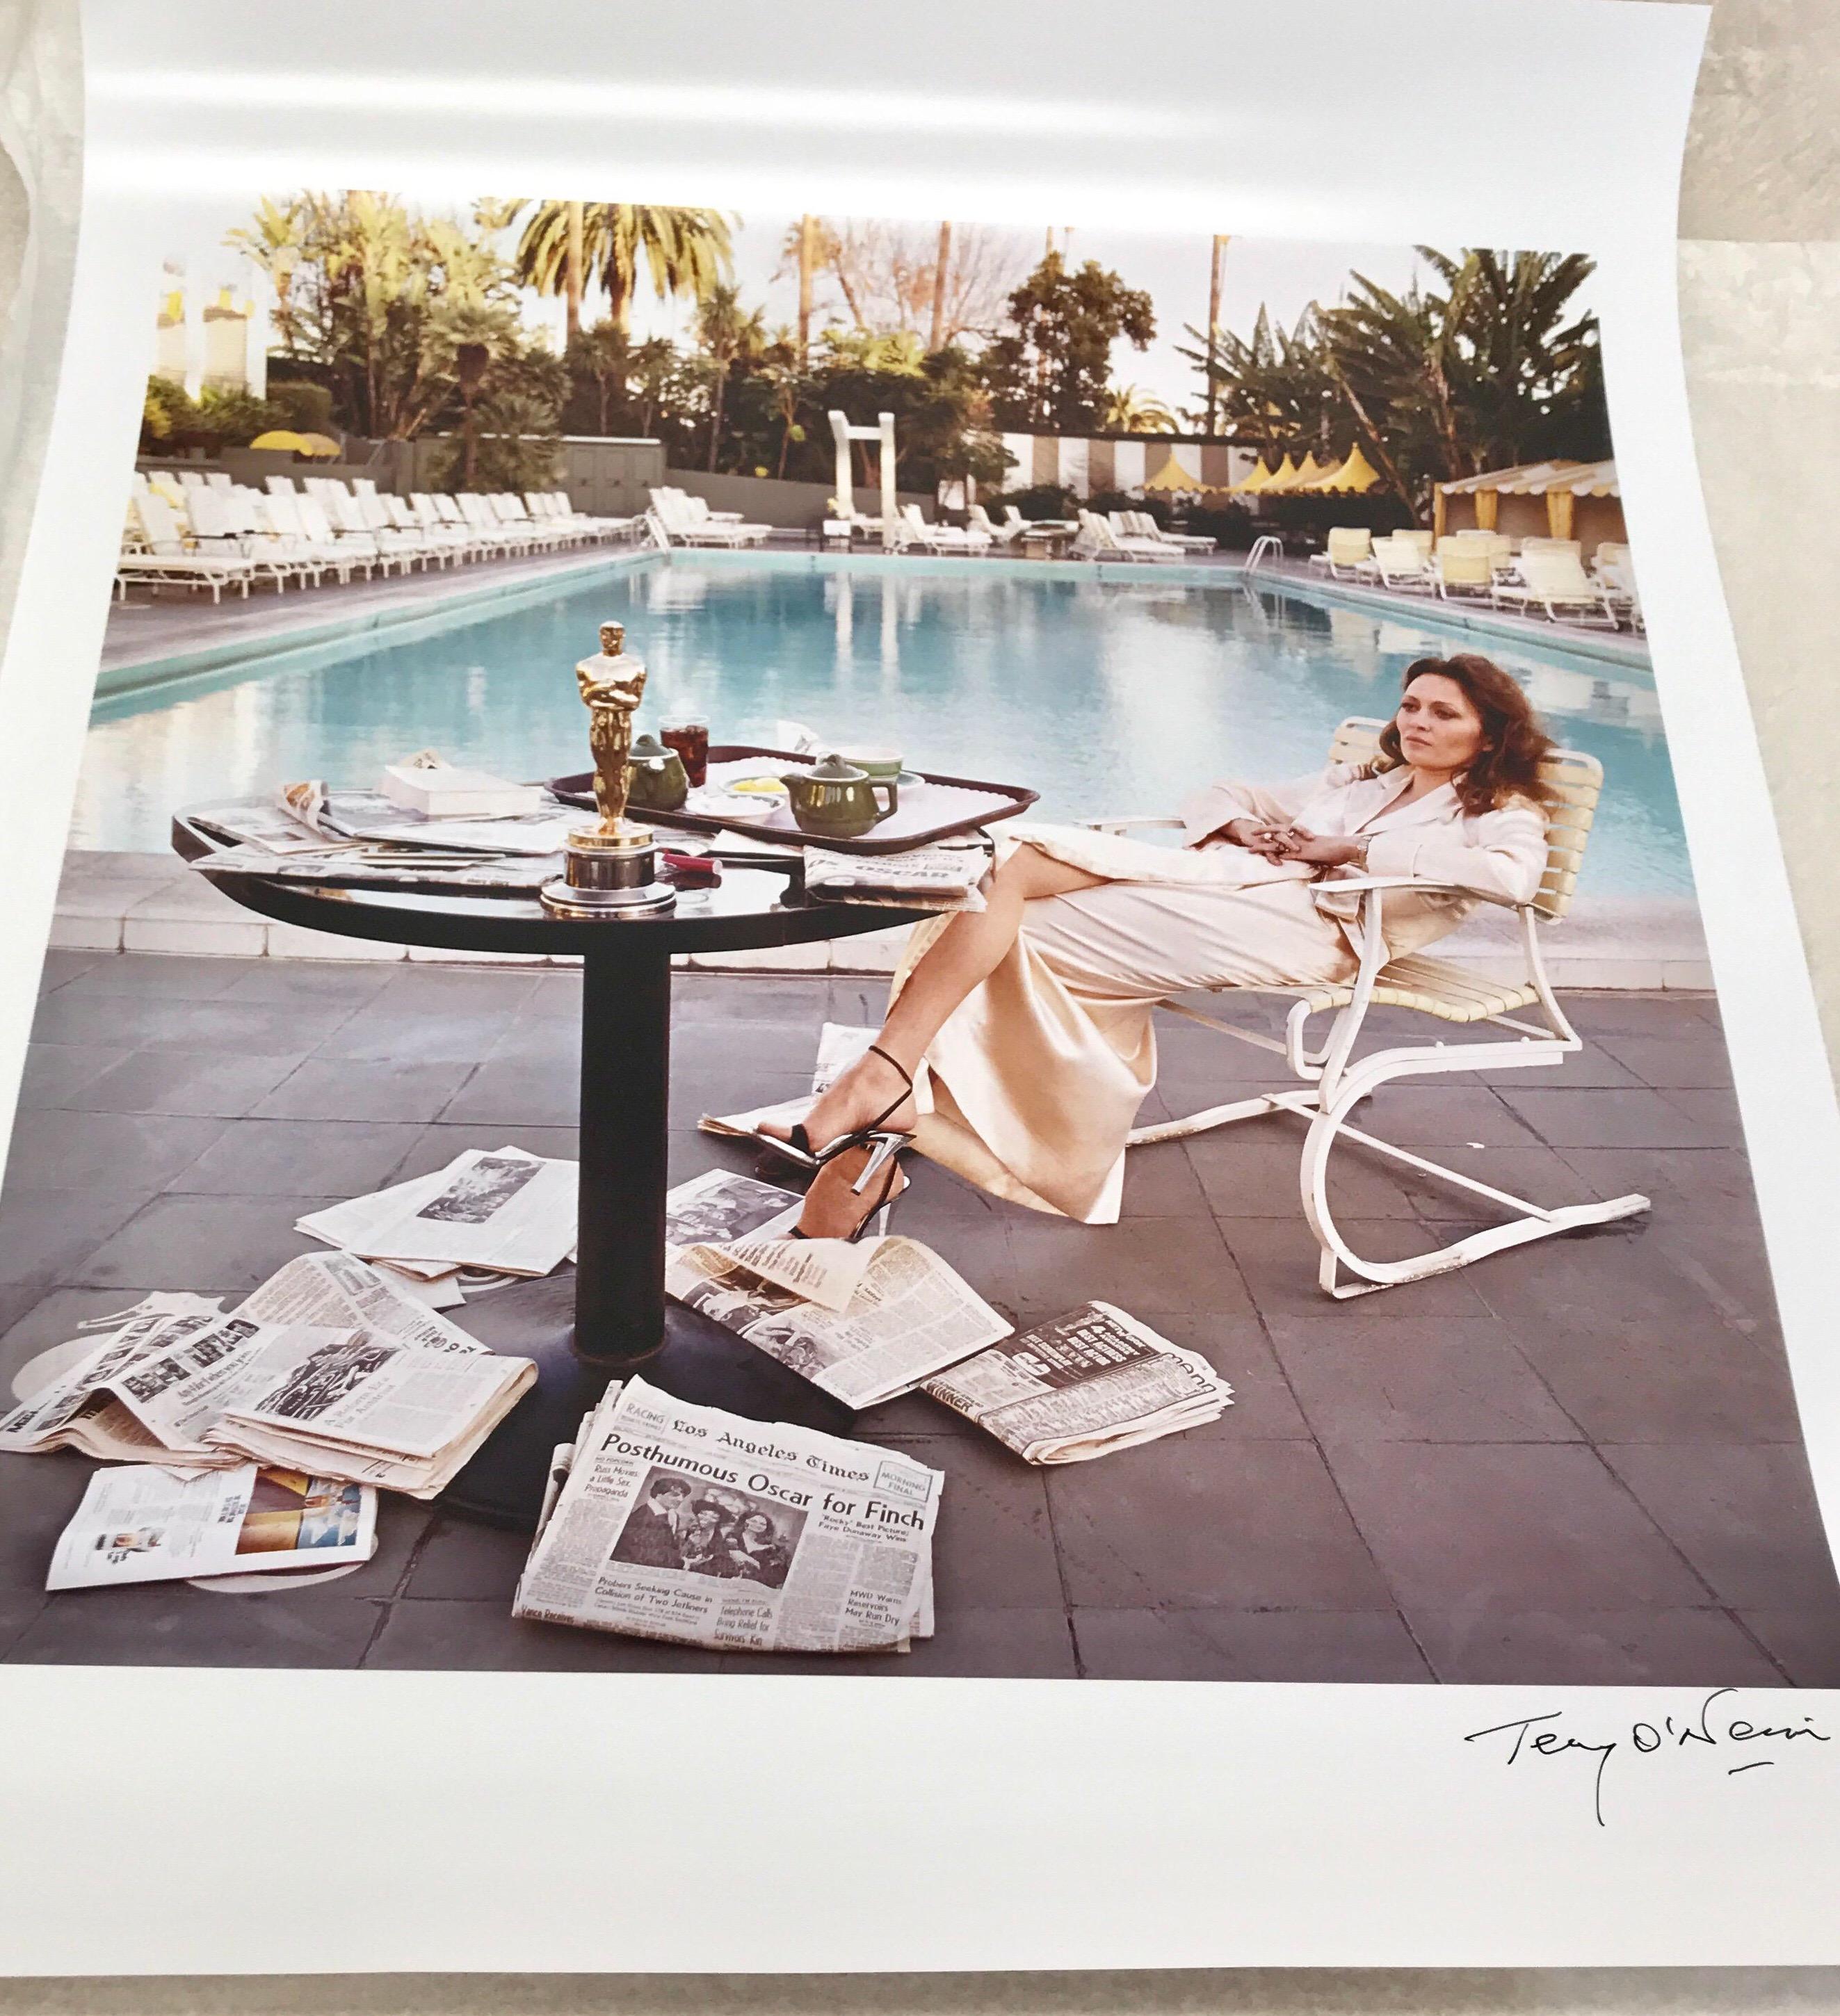 Terry O'Neill - Faye Dunaway Oscar Ennui - signed limited edition Oversize 2